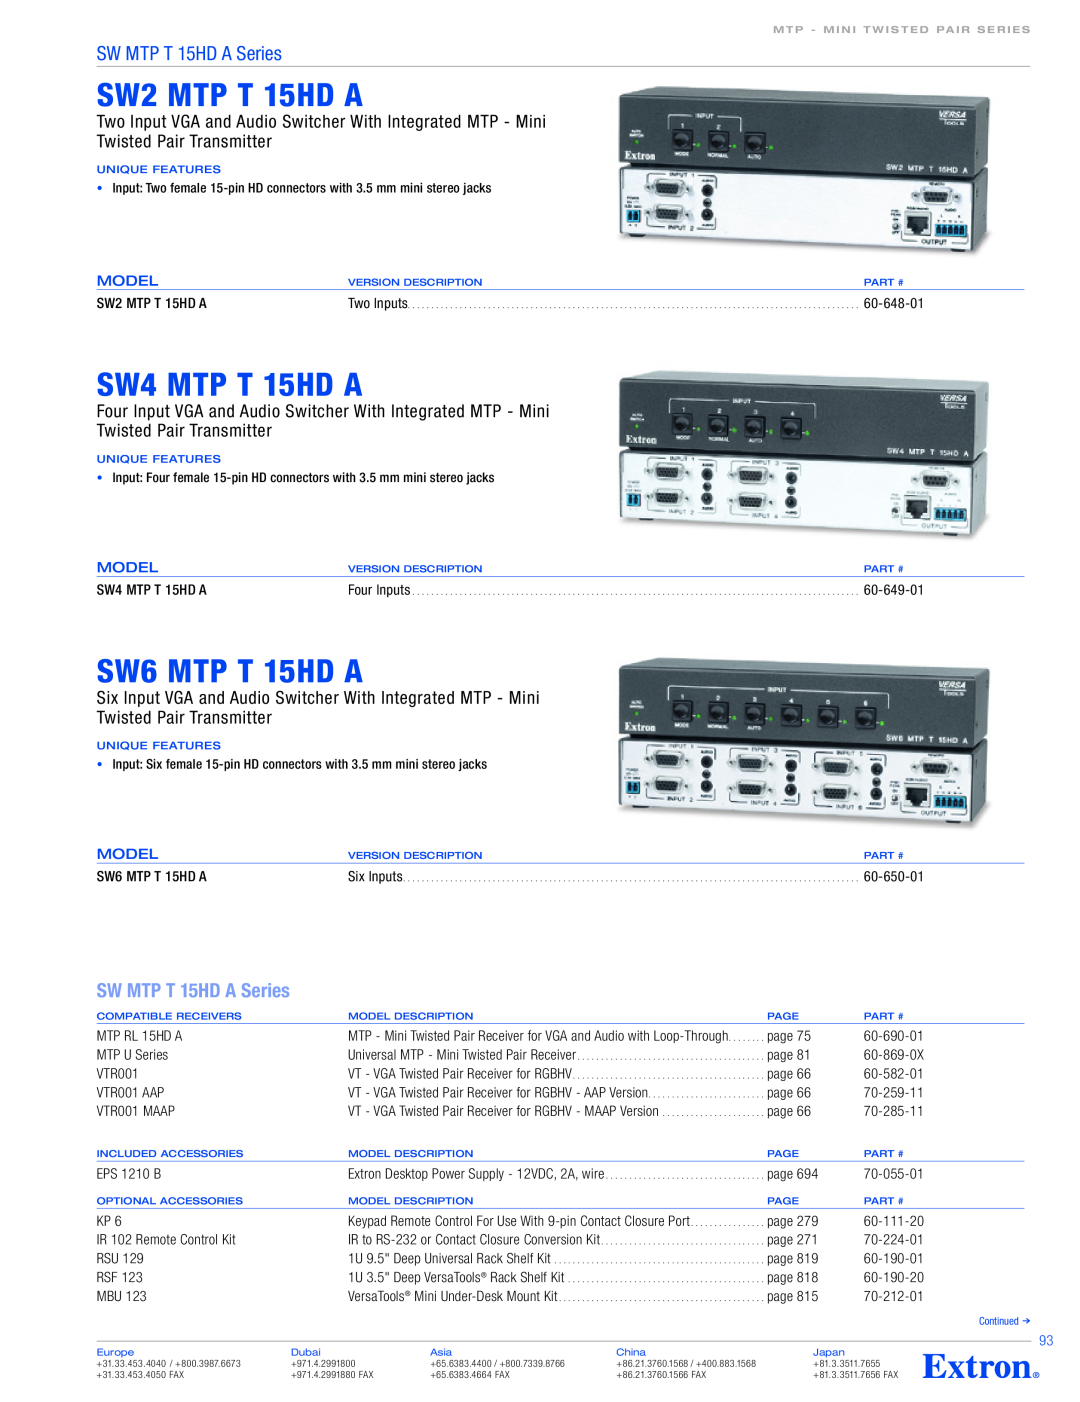 Extron electronic SW MTP T 15HD A Series SW2 MTP T 15HD A, SW4 MTP T 15HD A, SW6 MTP T 15HD A, Twisted Pair Transmitter 